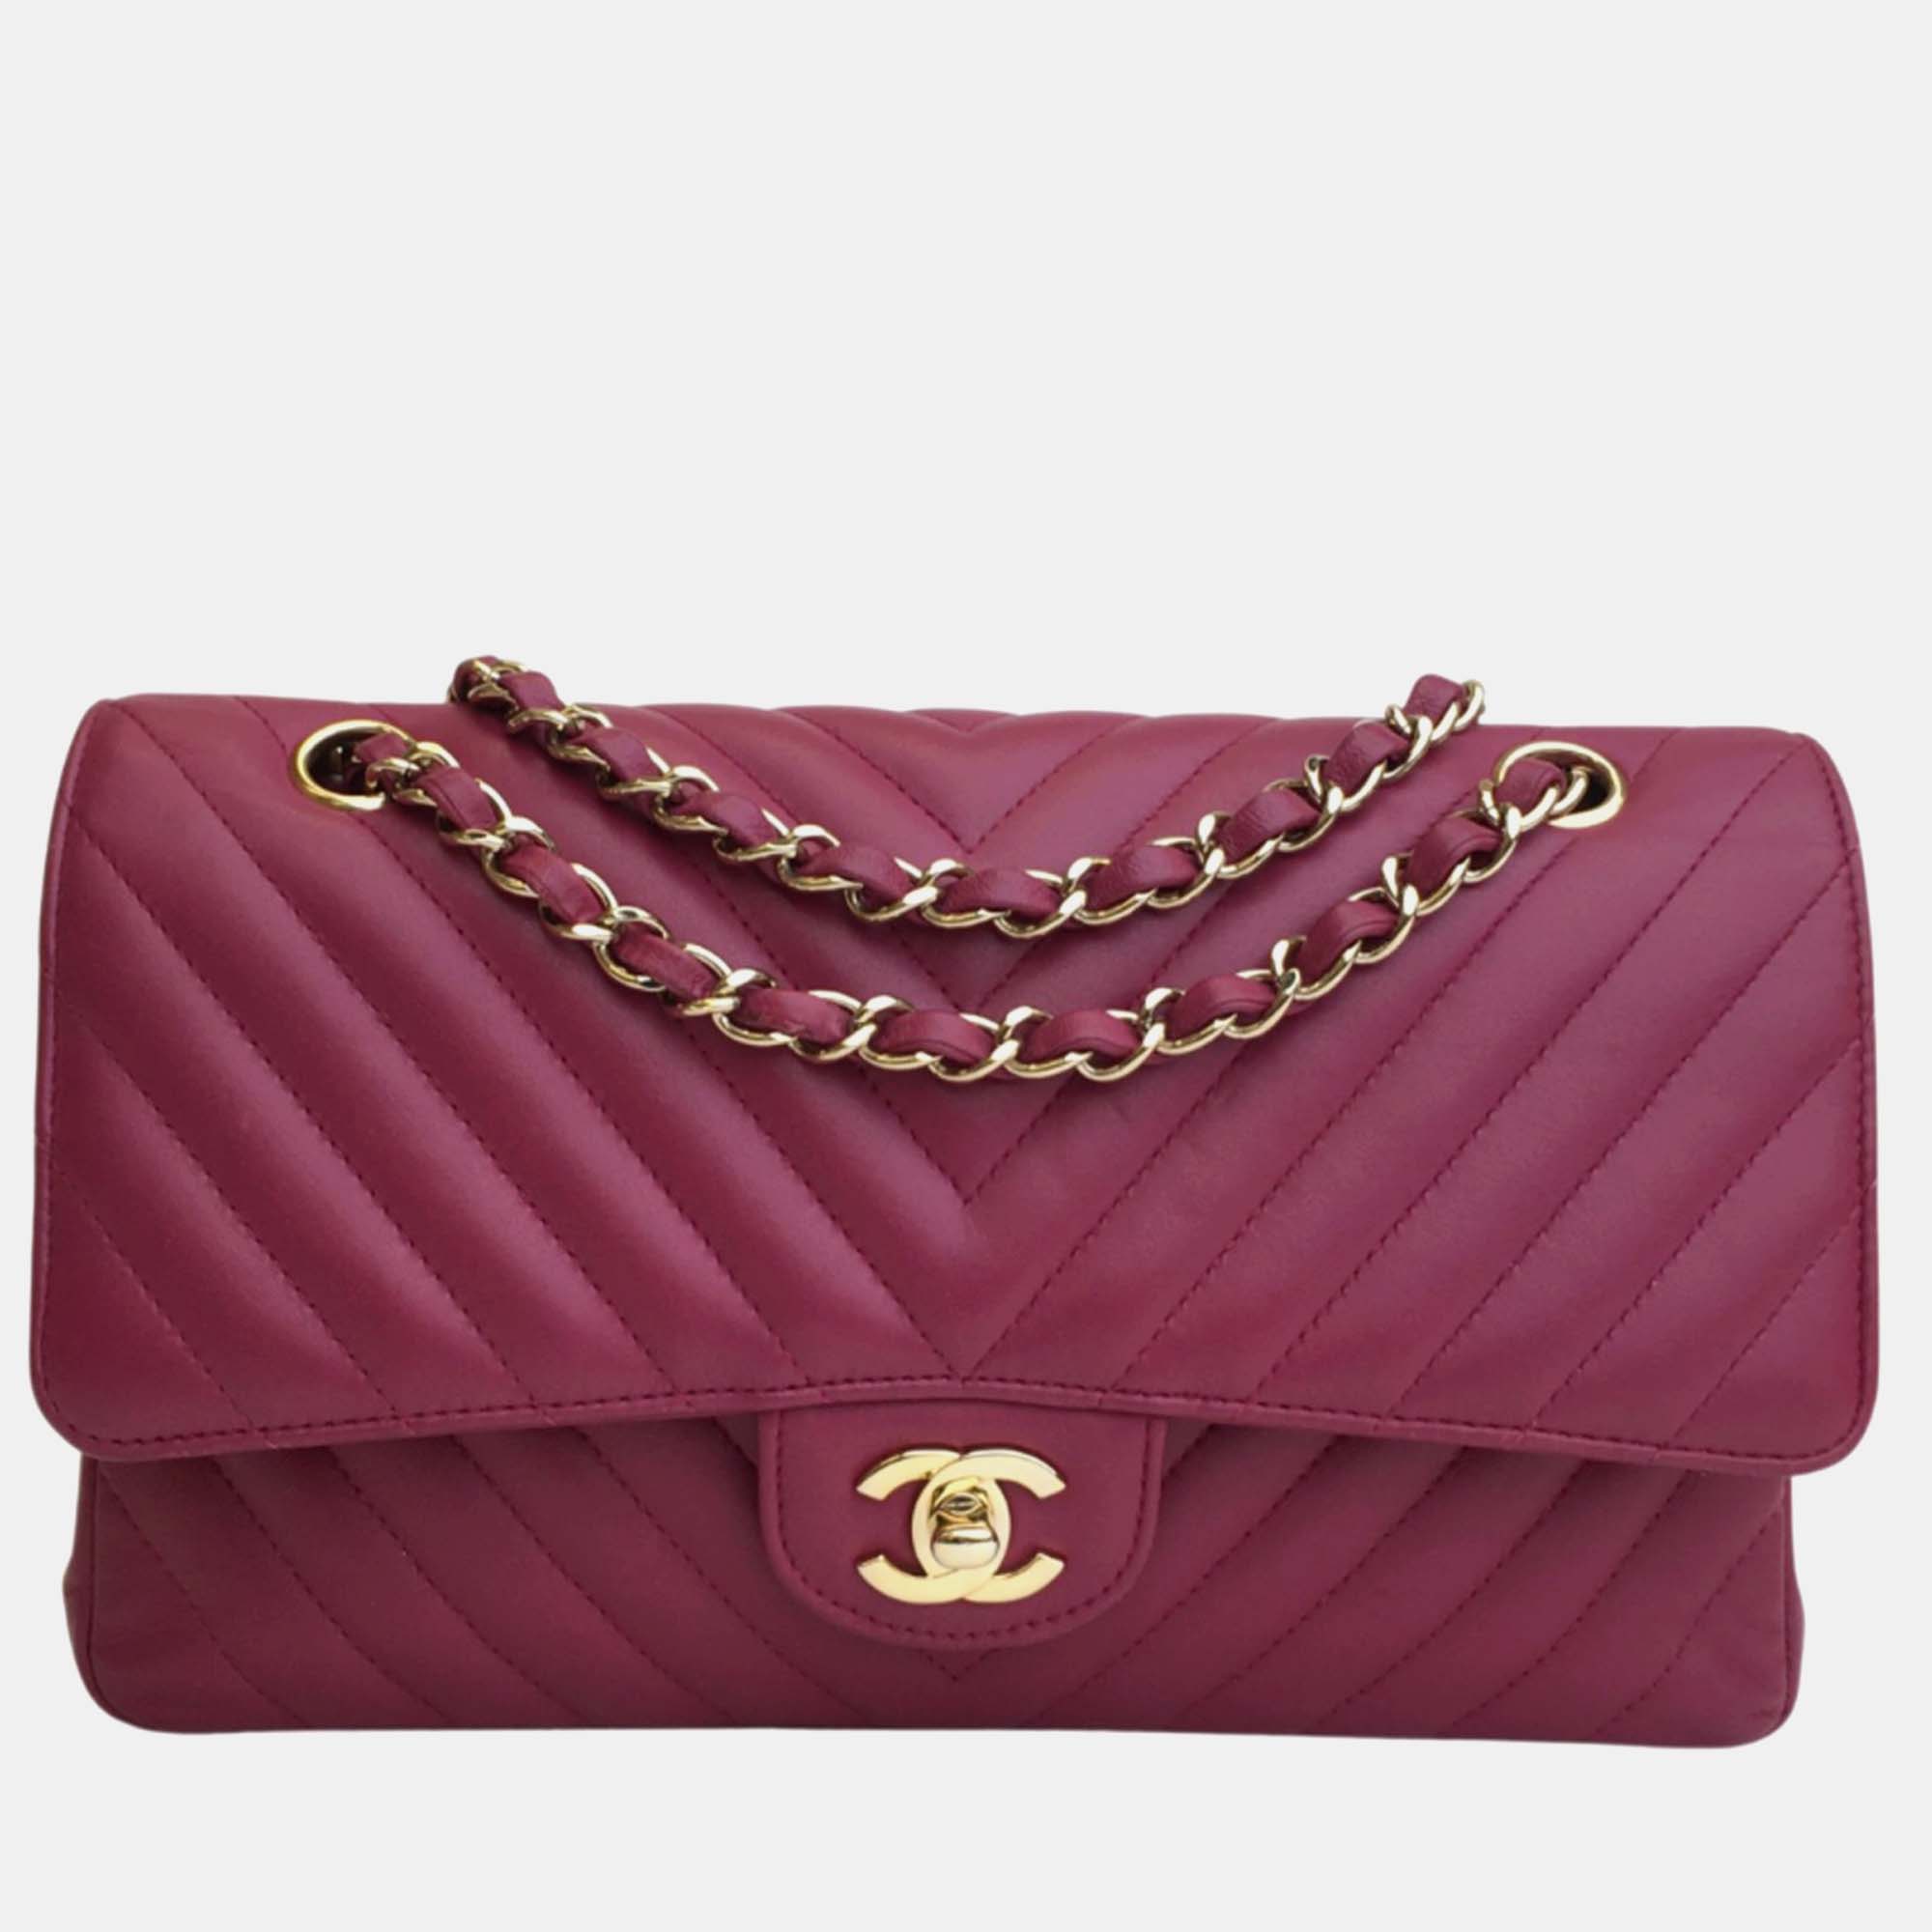 Chanel dark pink leather small classic double flap shoulder bags